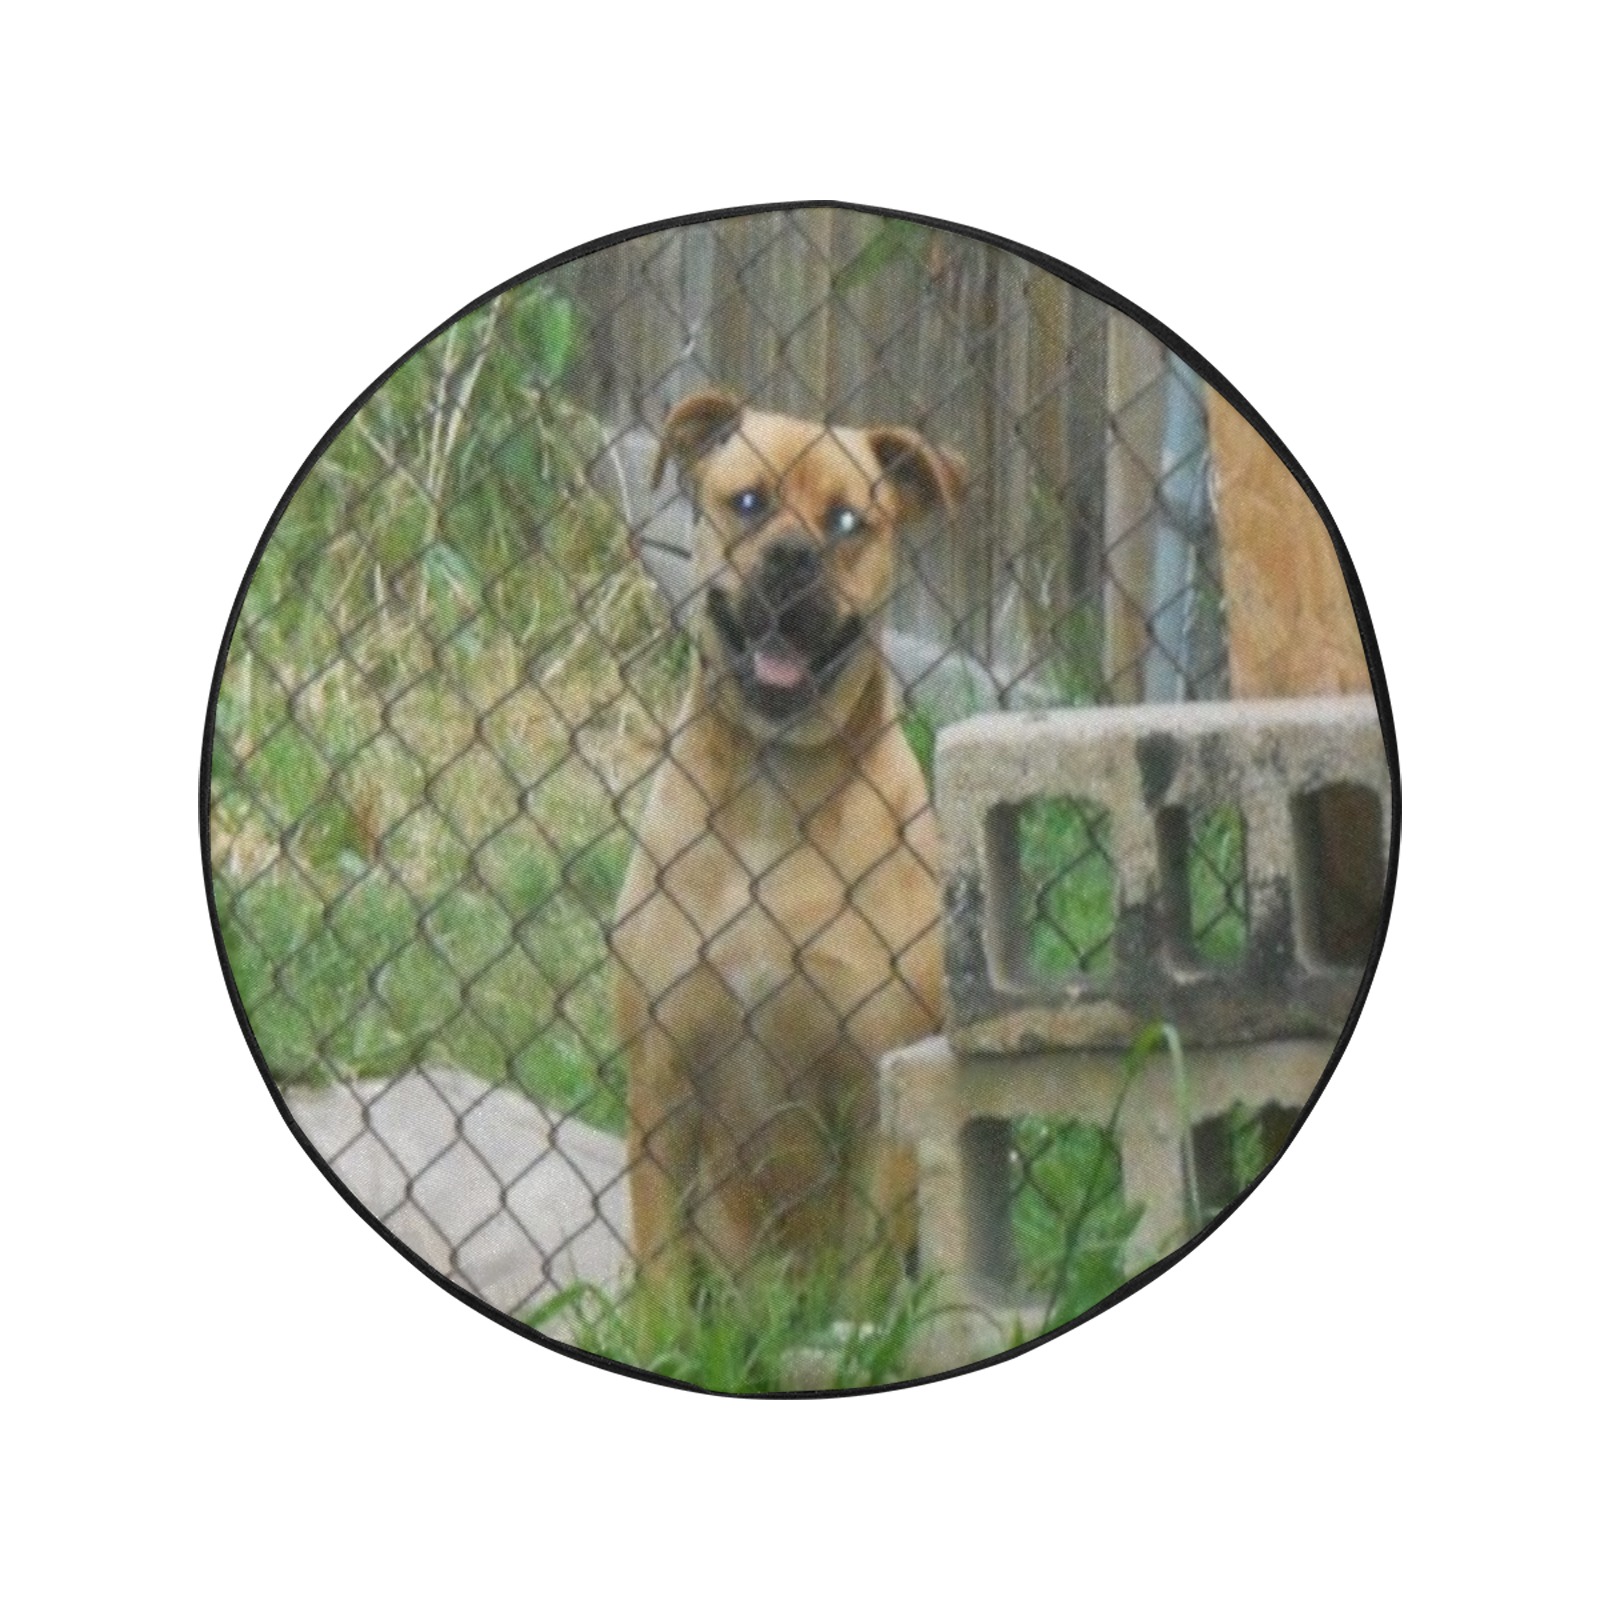 A Smiling Dog 34 Inch Spare Tire Cover